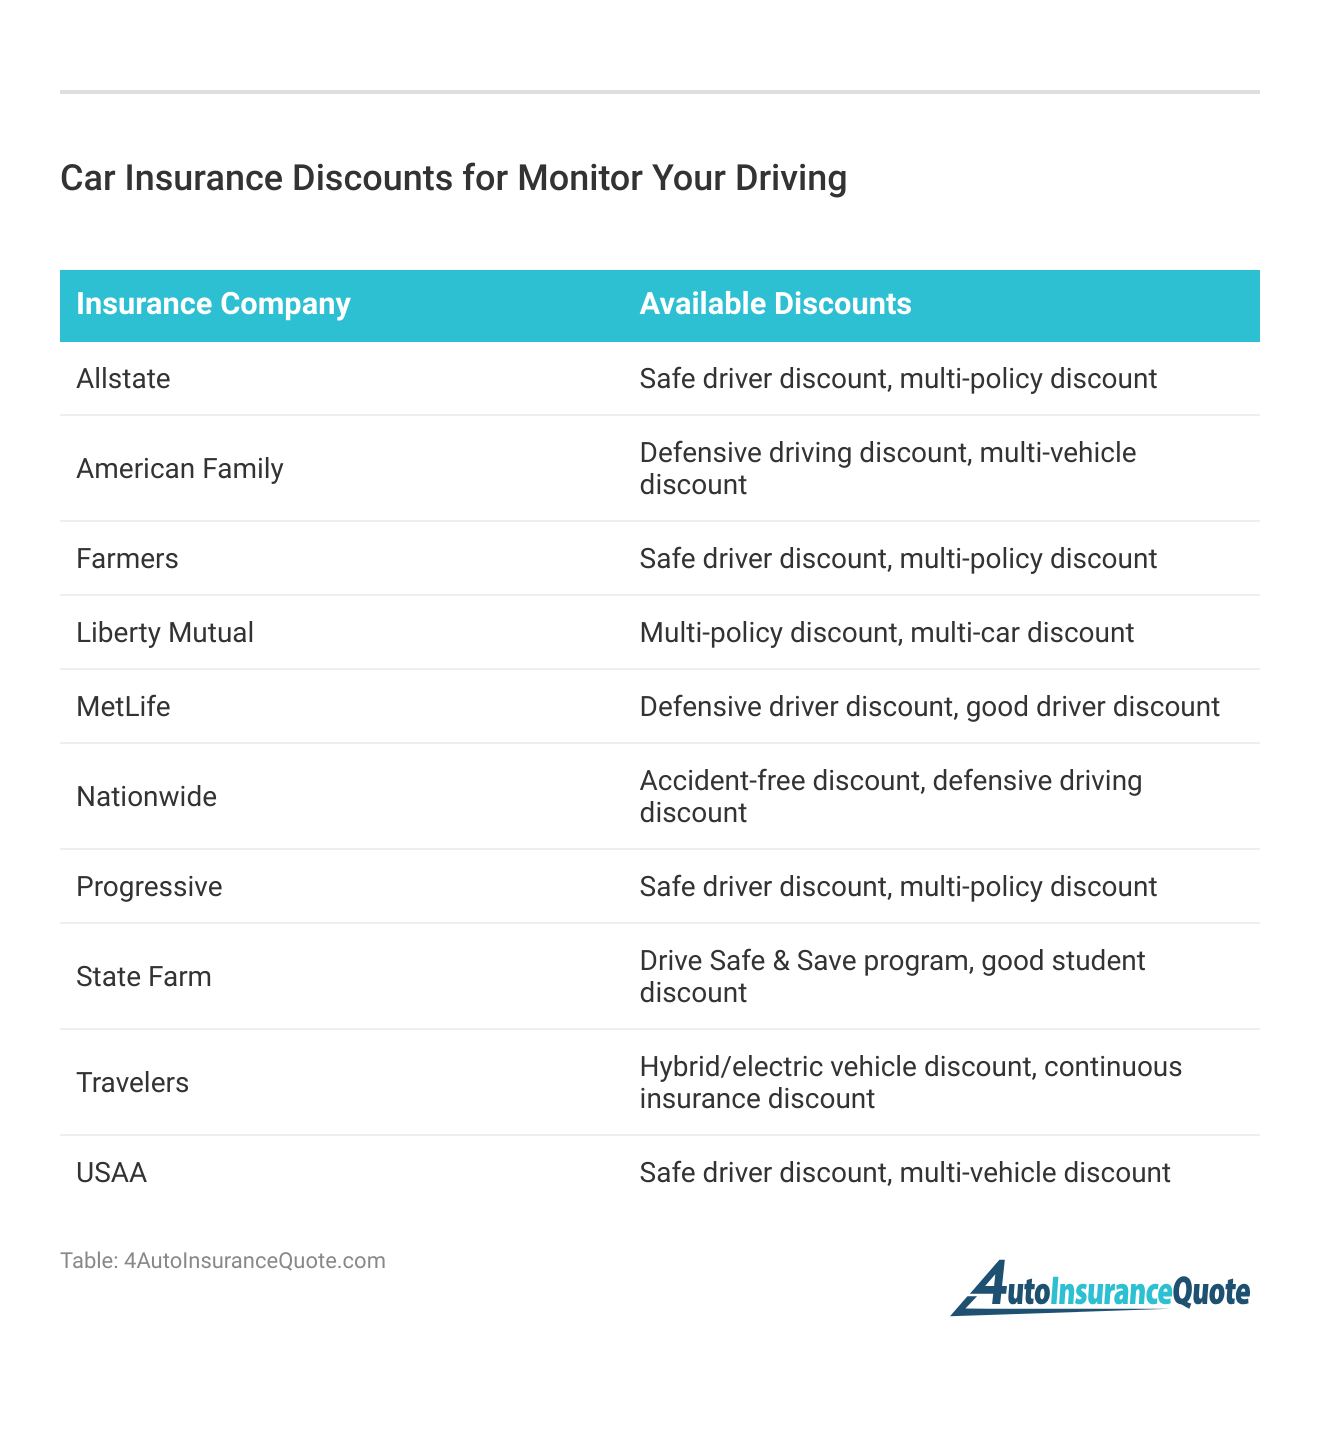 <h3>Car Insurance Discounts for Monitor Your Driving</h3>